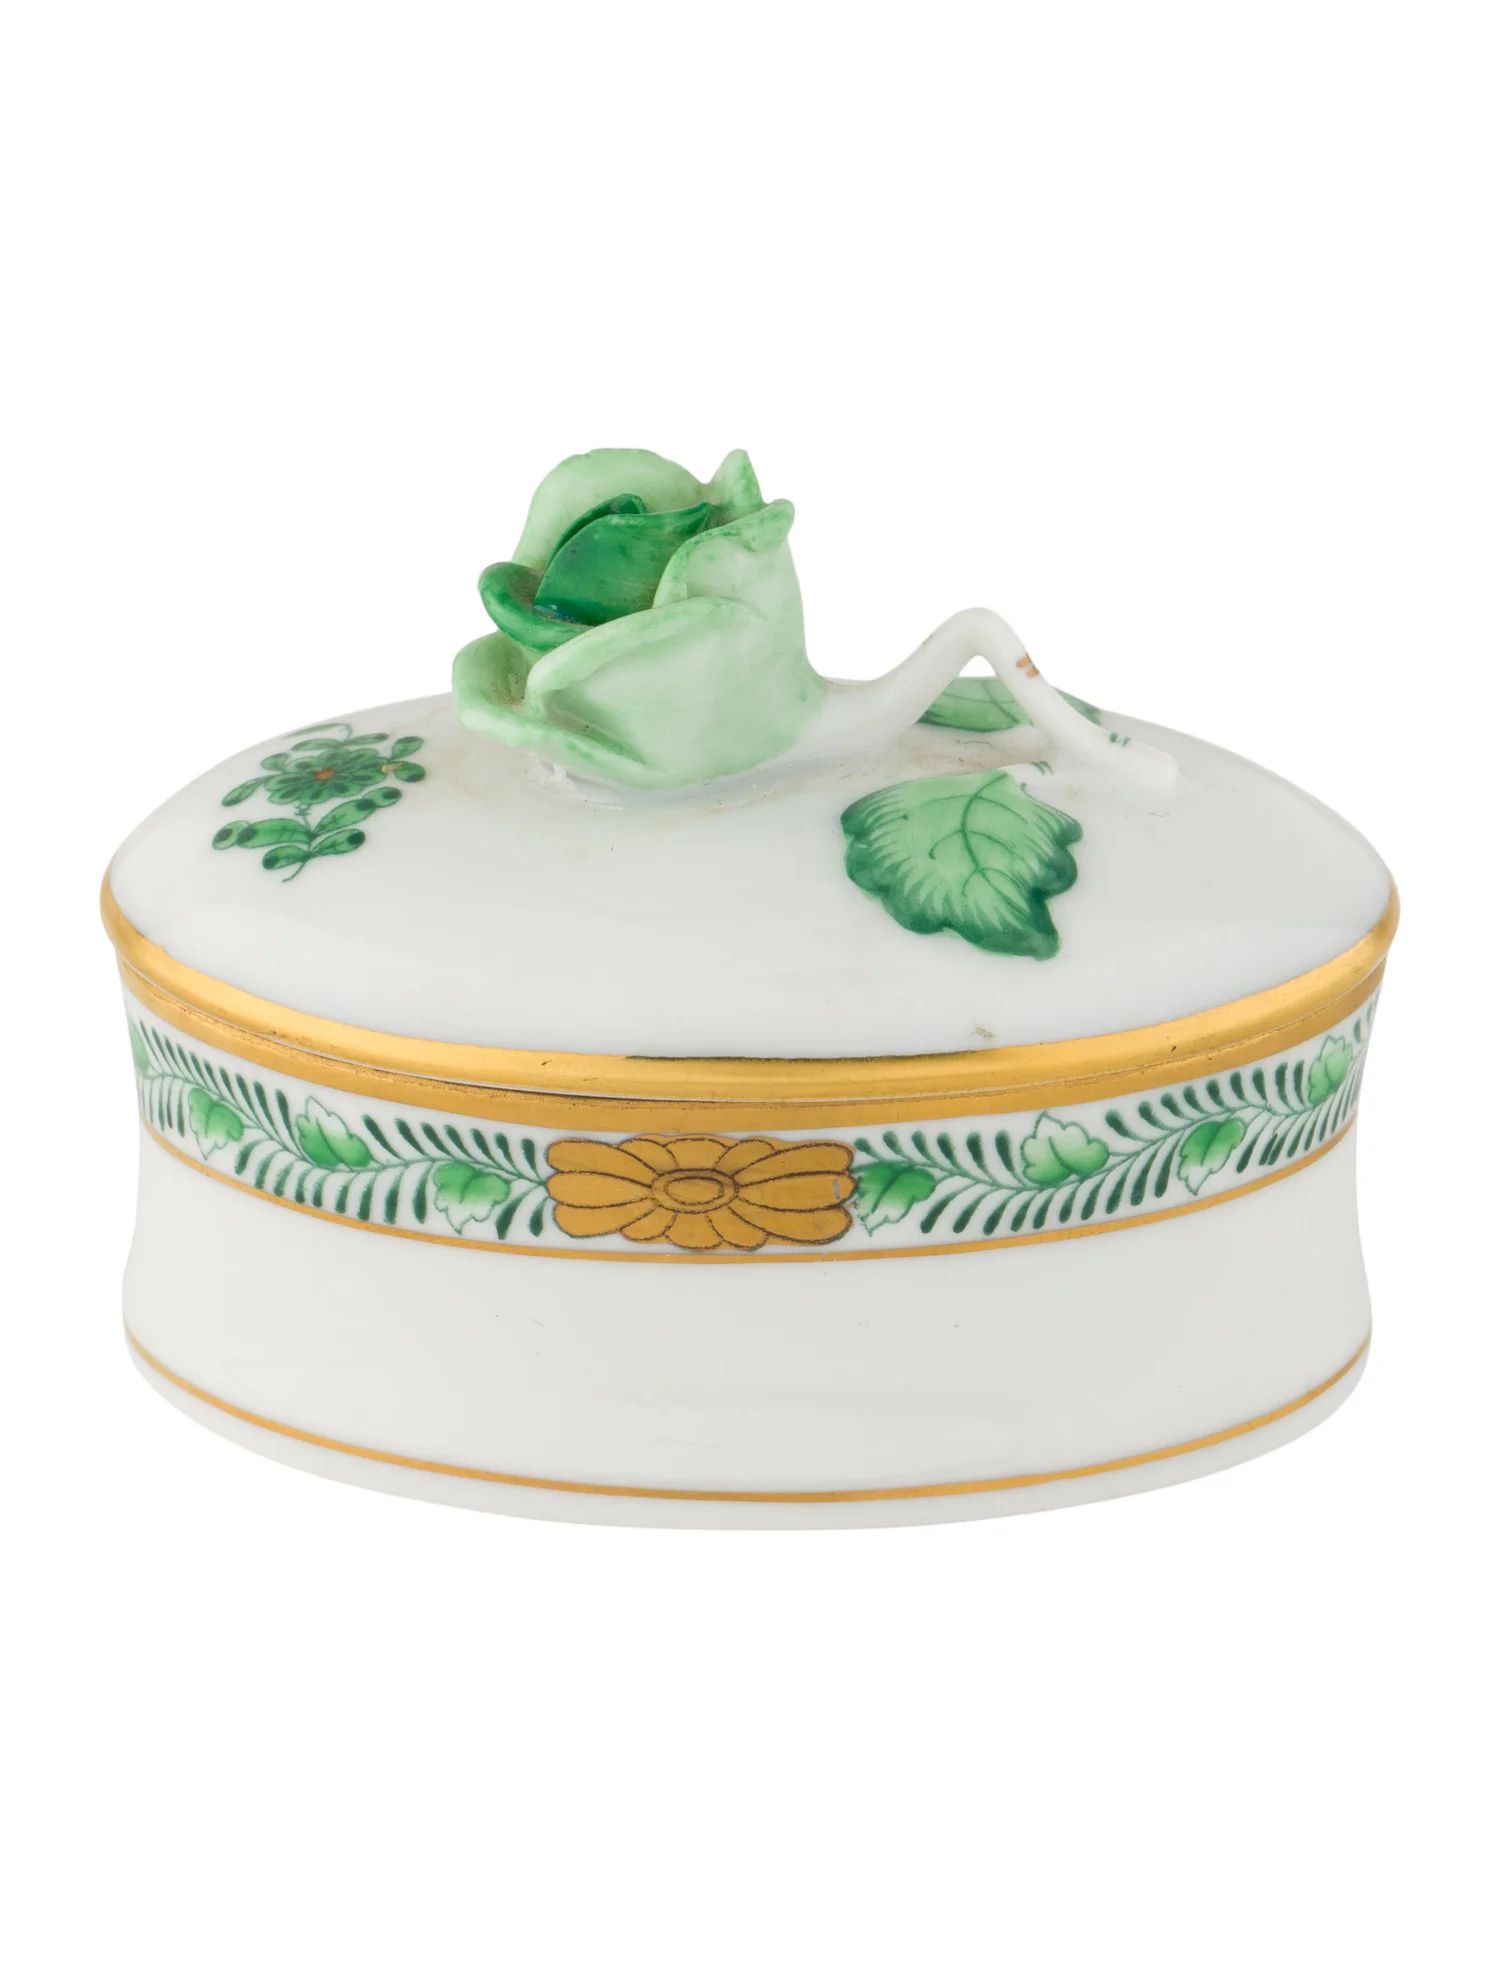 Herend Chinese Bouquet Trinket Box - Decor & Accessories -
          HND25324 | The RealReal | The RealReal